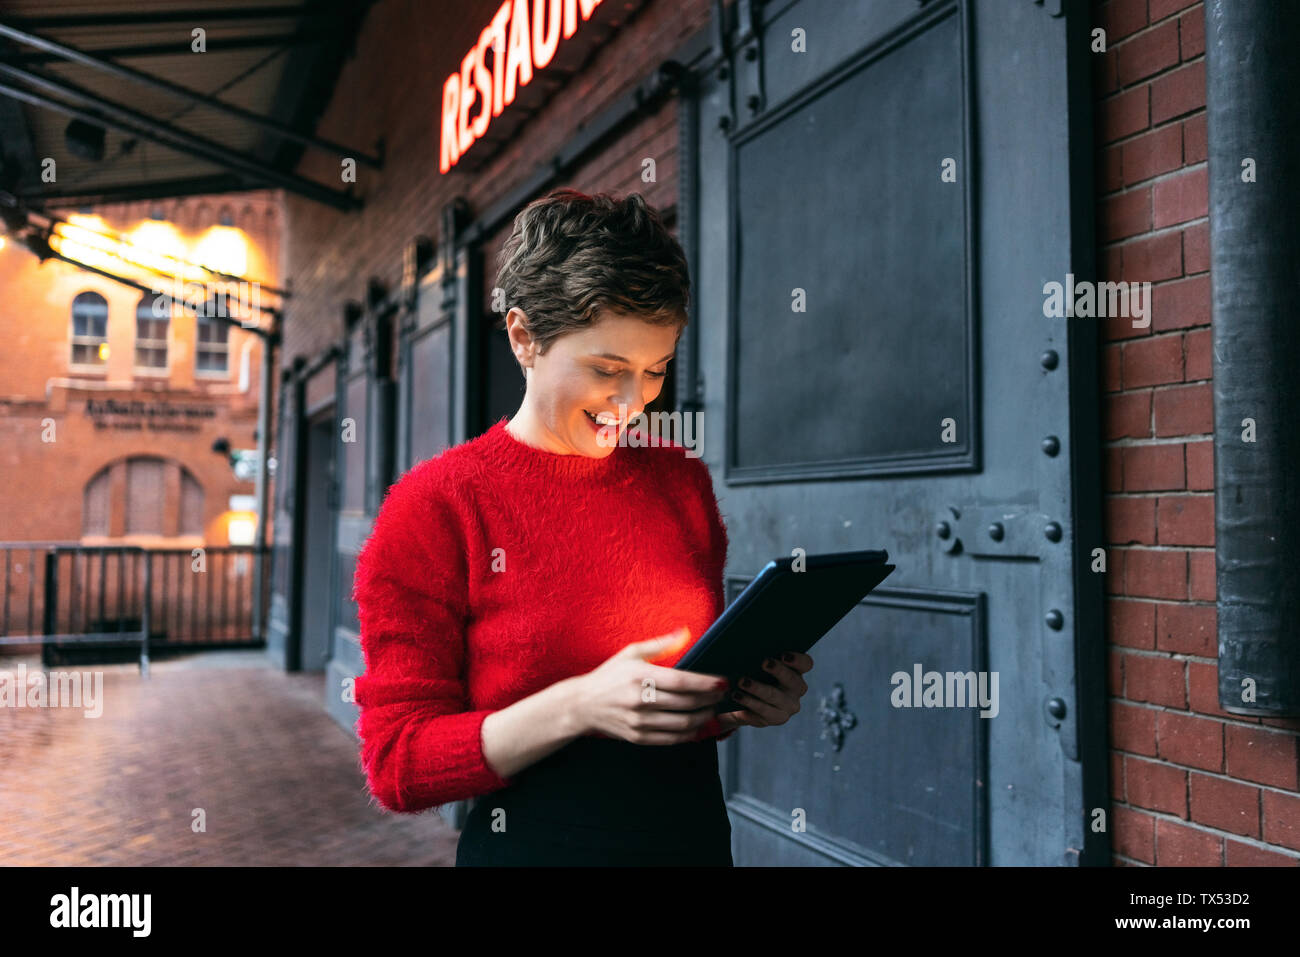 Germany, Berlin, smiling restaurant manager using digital tablet outdoors Stock Photo